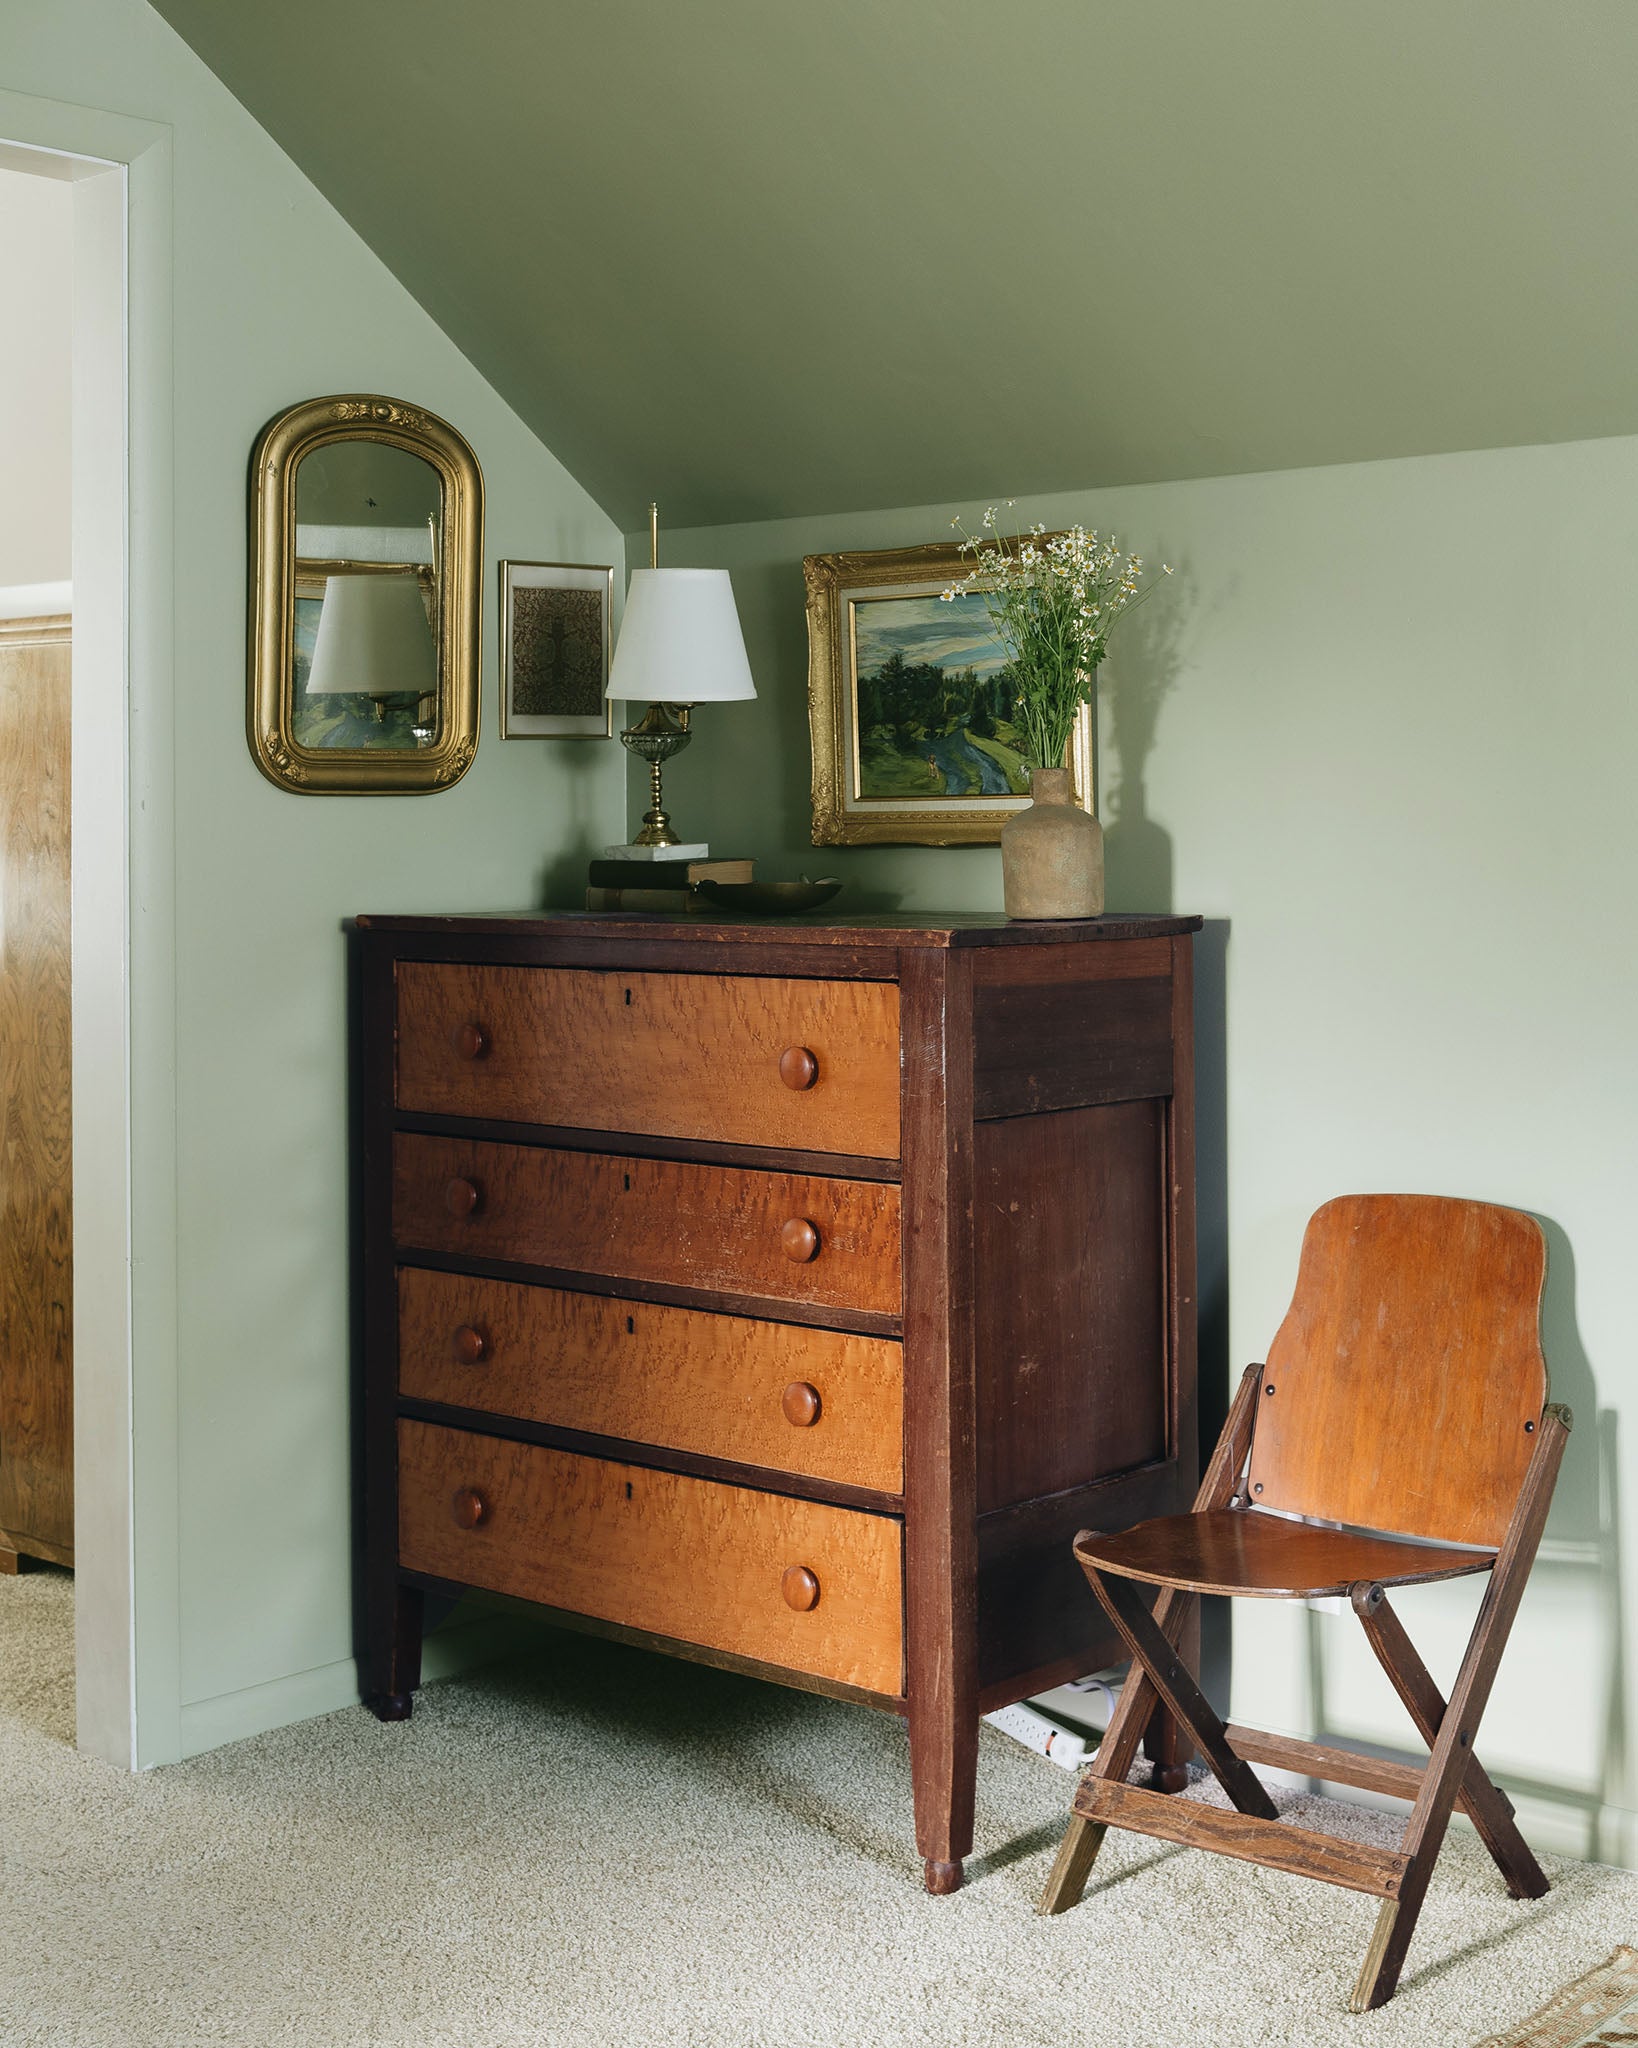 This cottagecore bedroom pairs a soft green on the walls (Dirty Martini from Clare) with warm wood tones.